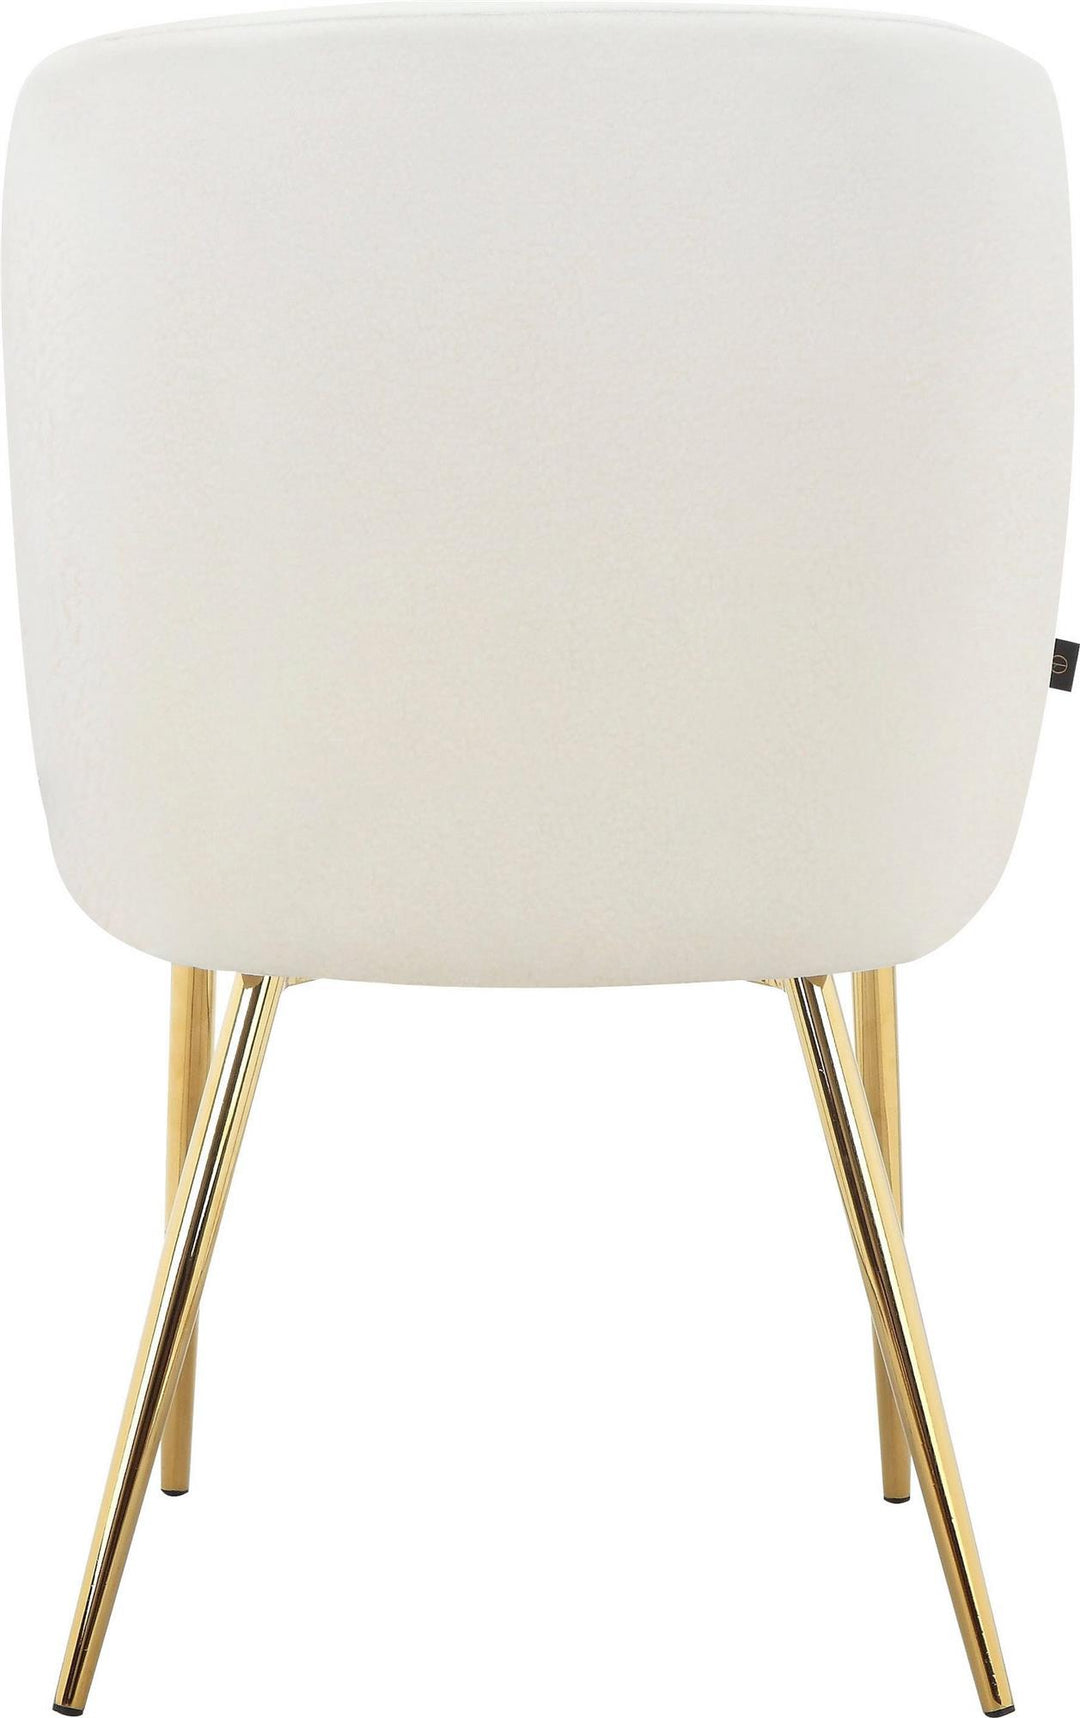 Trina Dining Chair with Chrome Plated Gold Legs, Set of 2 - White - Set of 2